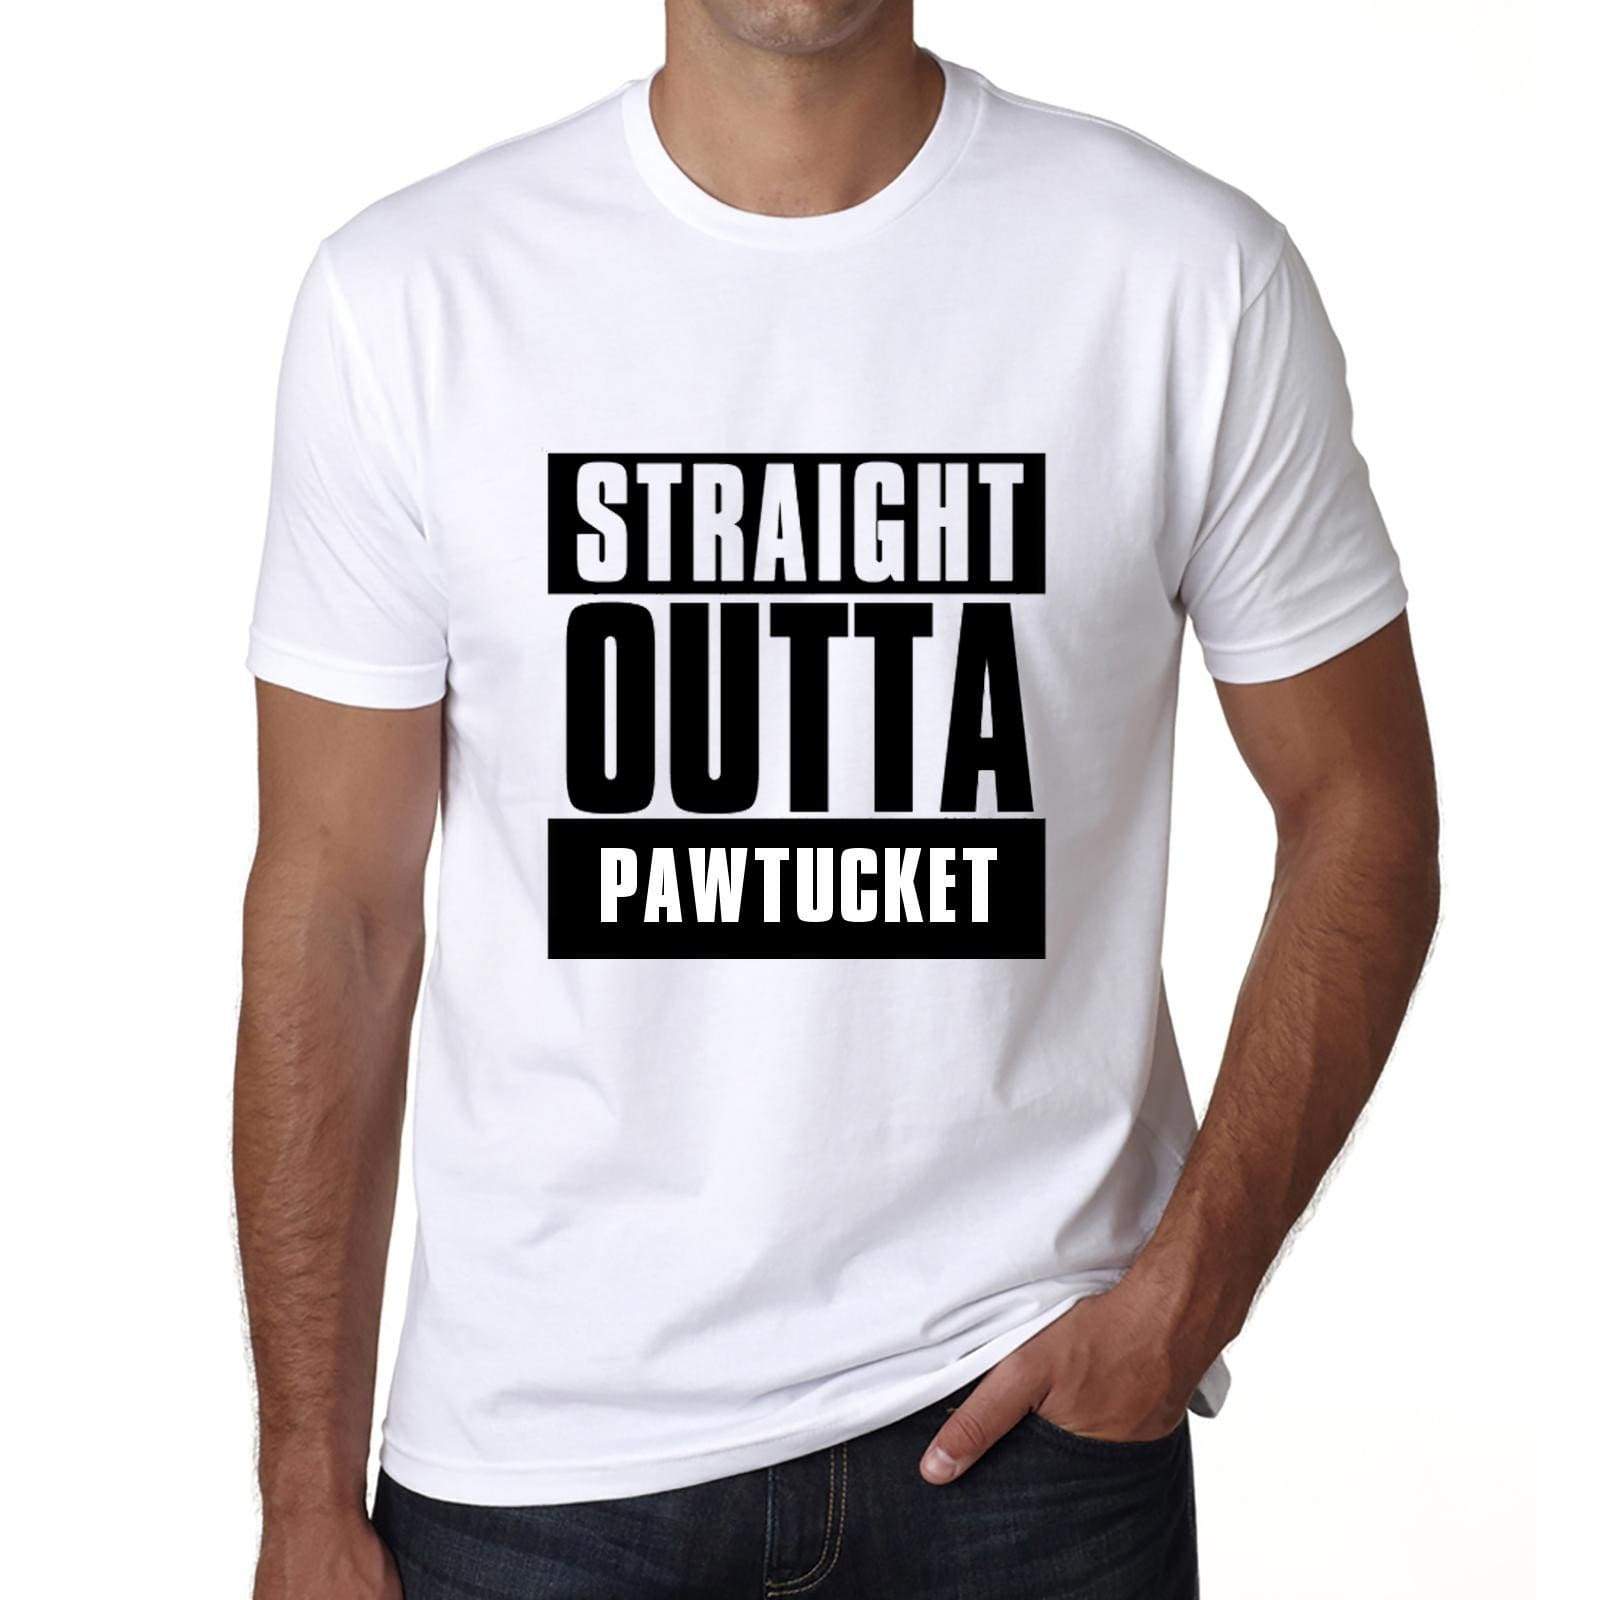 Straight Outta Pawtucket Mens Short Sleeve Round Neck T-Shirt 00027 - White / S - Casual